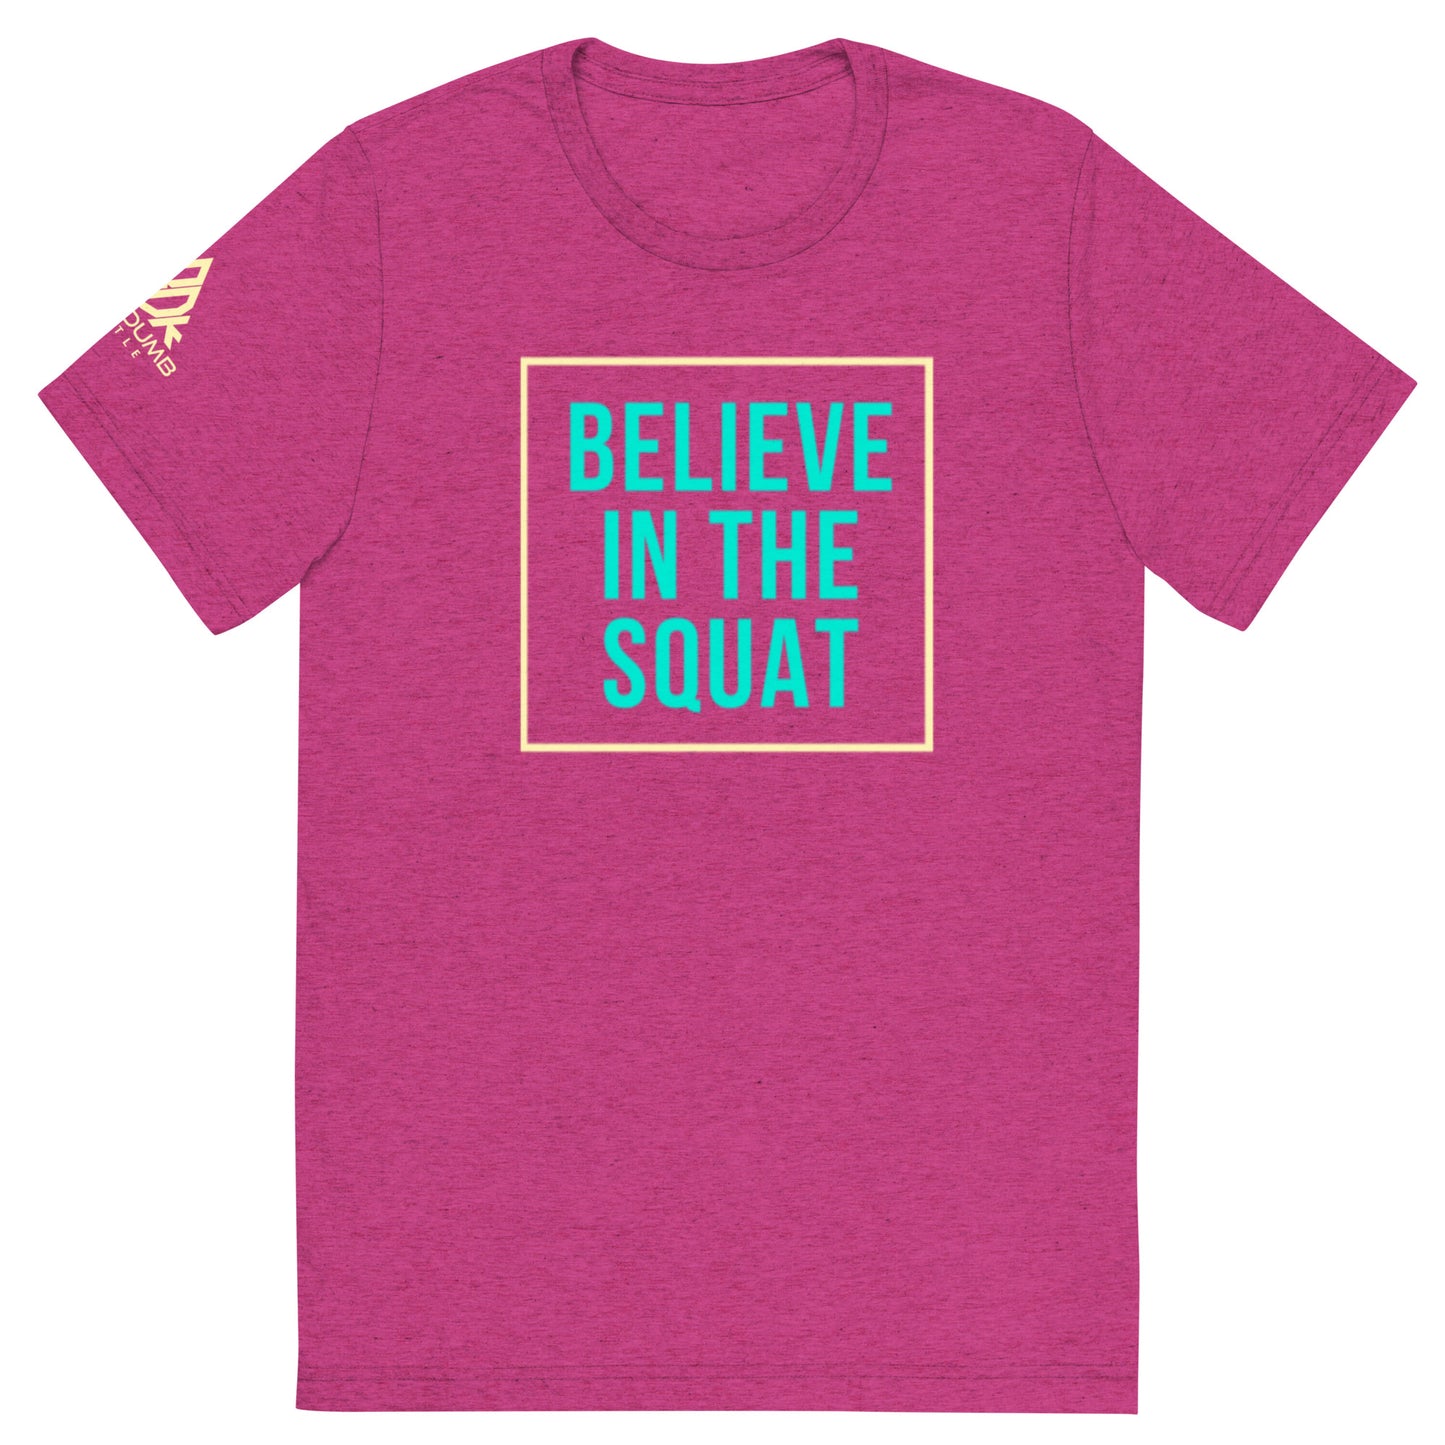 Believe in the Squat: Berry Short sleeve